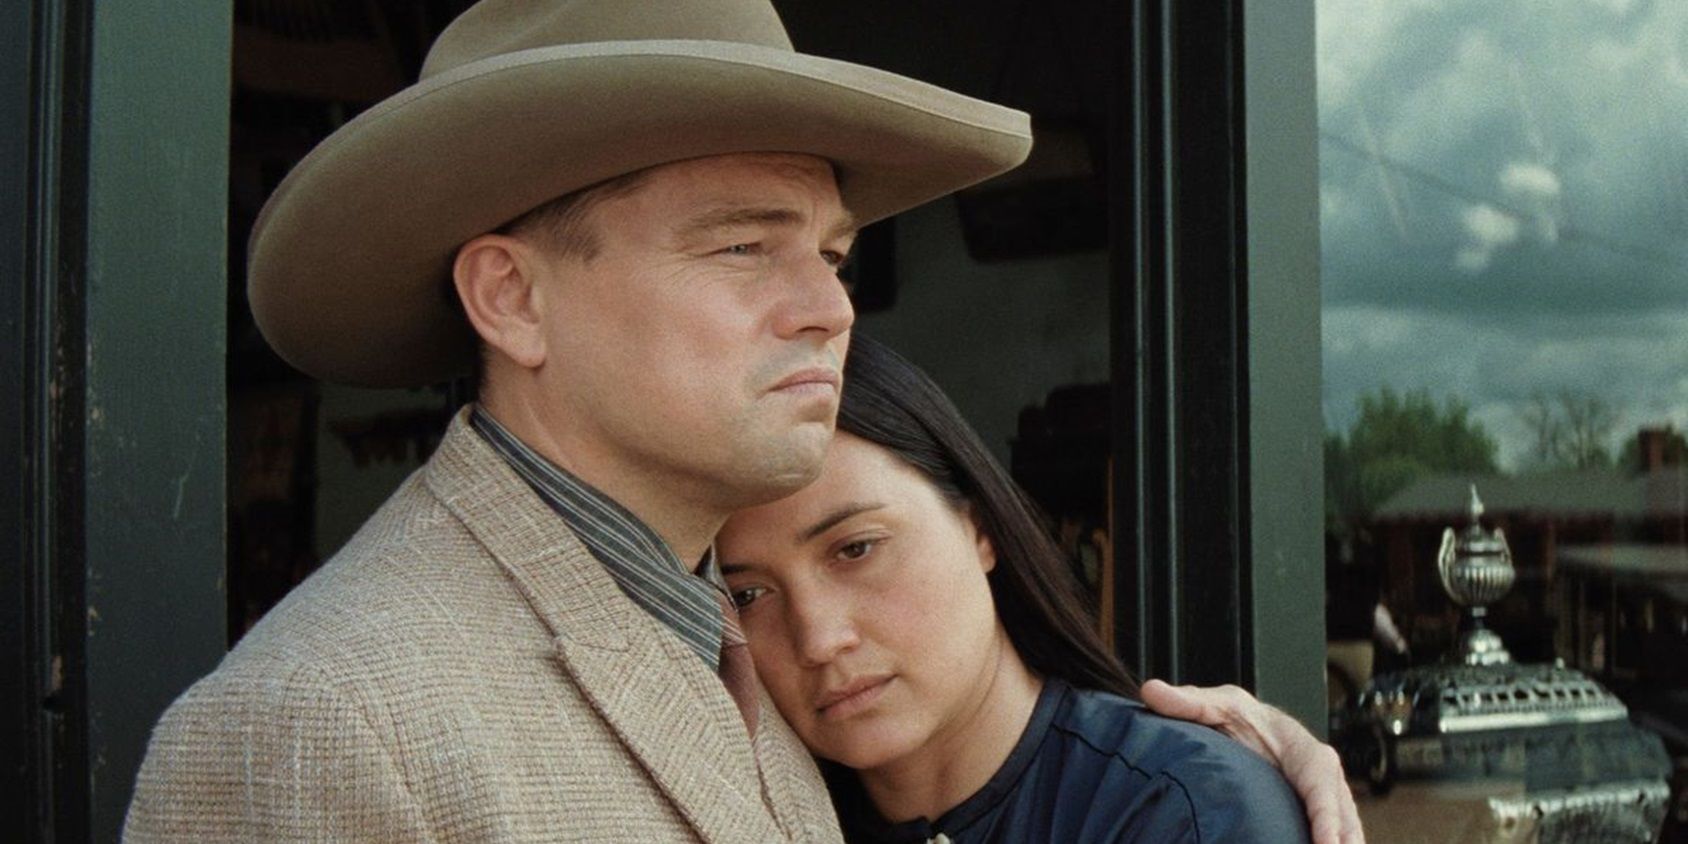 Leonardo DiCaprio's Ernest comforts Lily Gladstone's Mollie in Killers of the Flower Moon